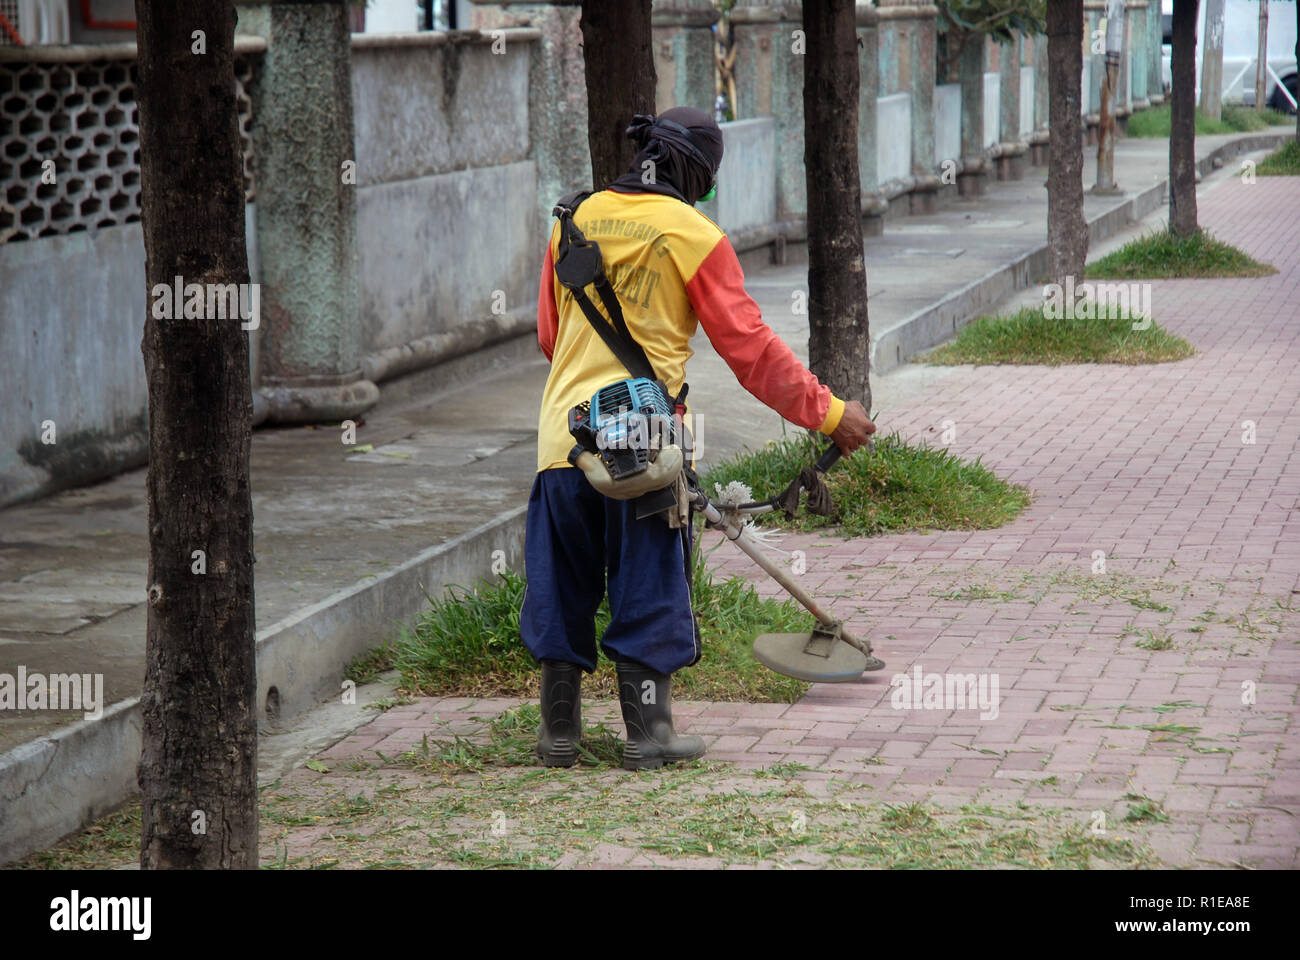 Workers cutting the grass with a whipper snipper, Dumagette, Philippines. Stock Photo